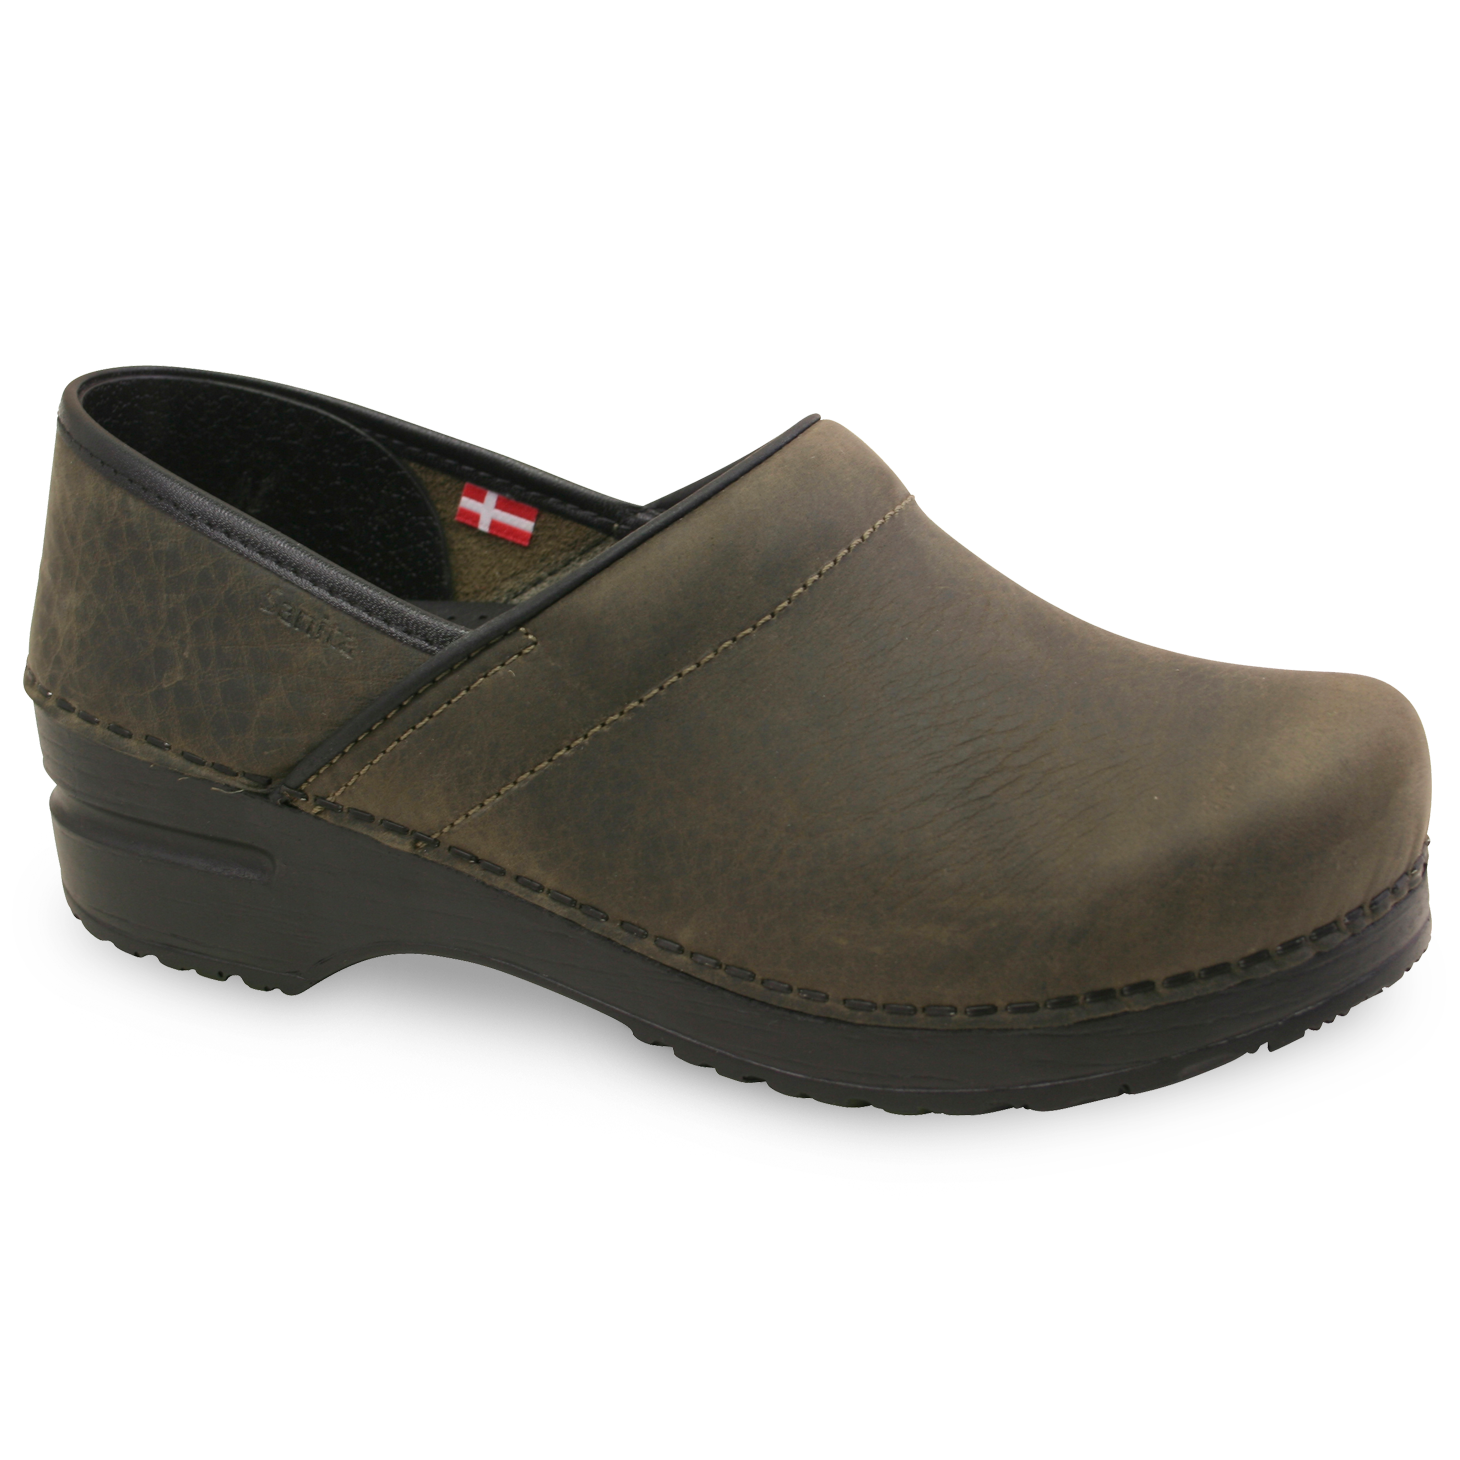 Sanita Pro. Oiled Leather Women's in Olive Closed Back Clog